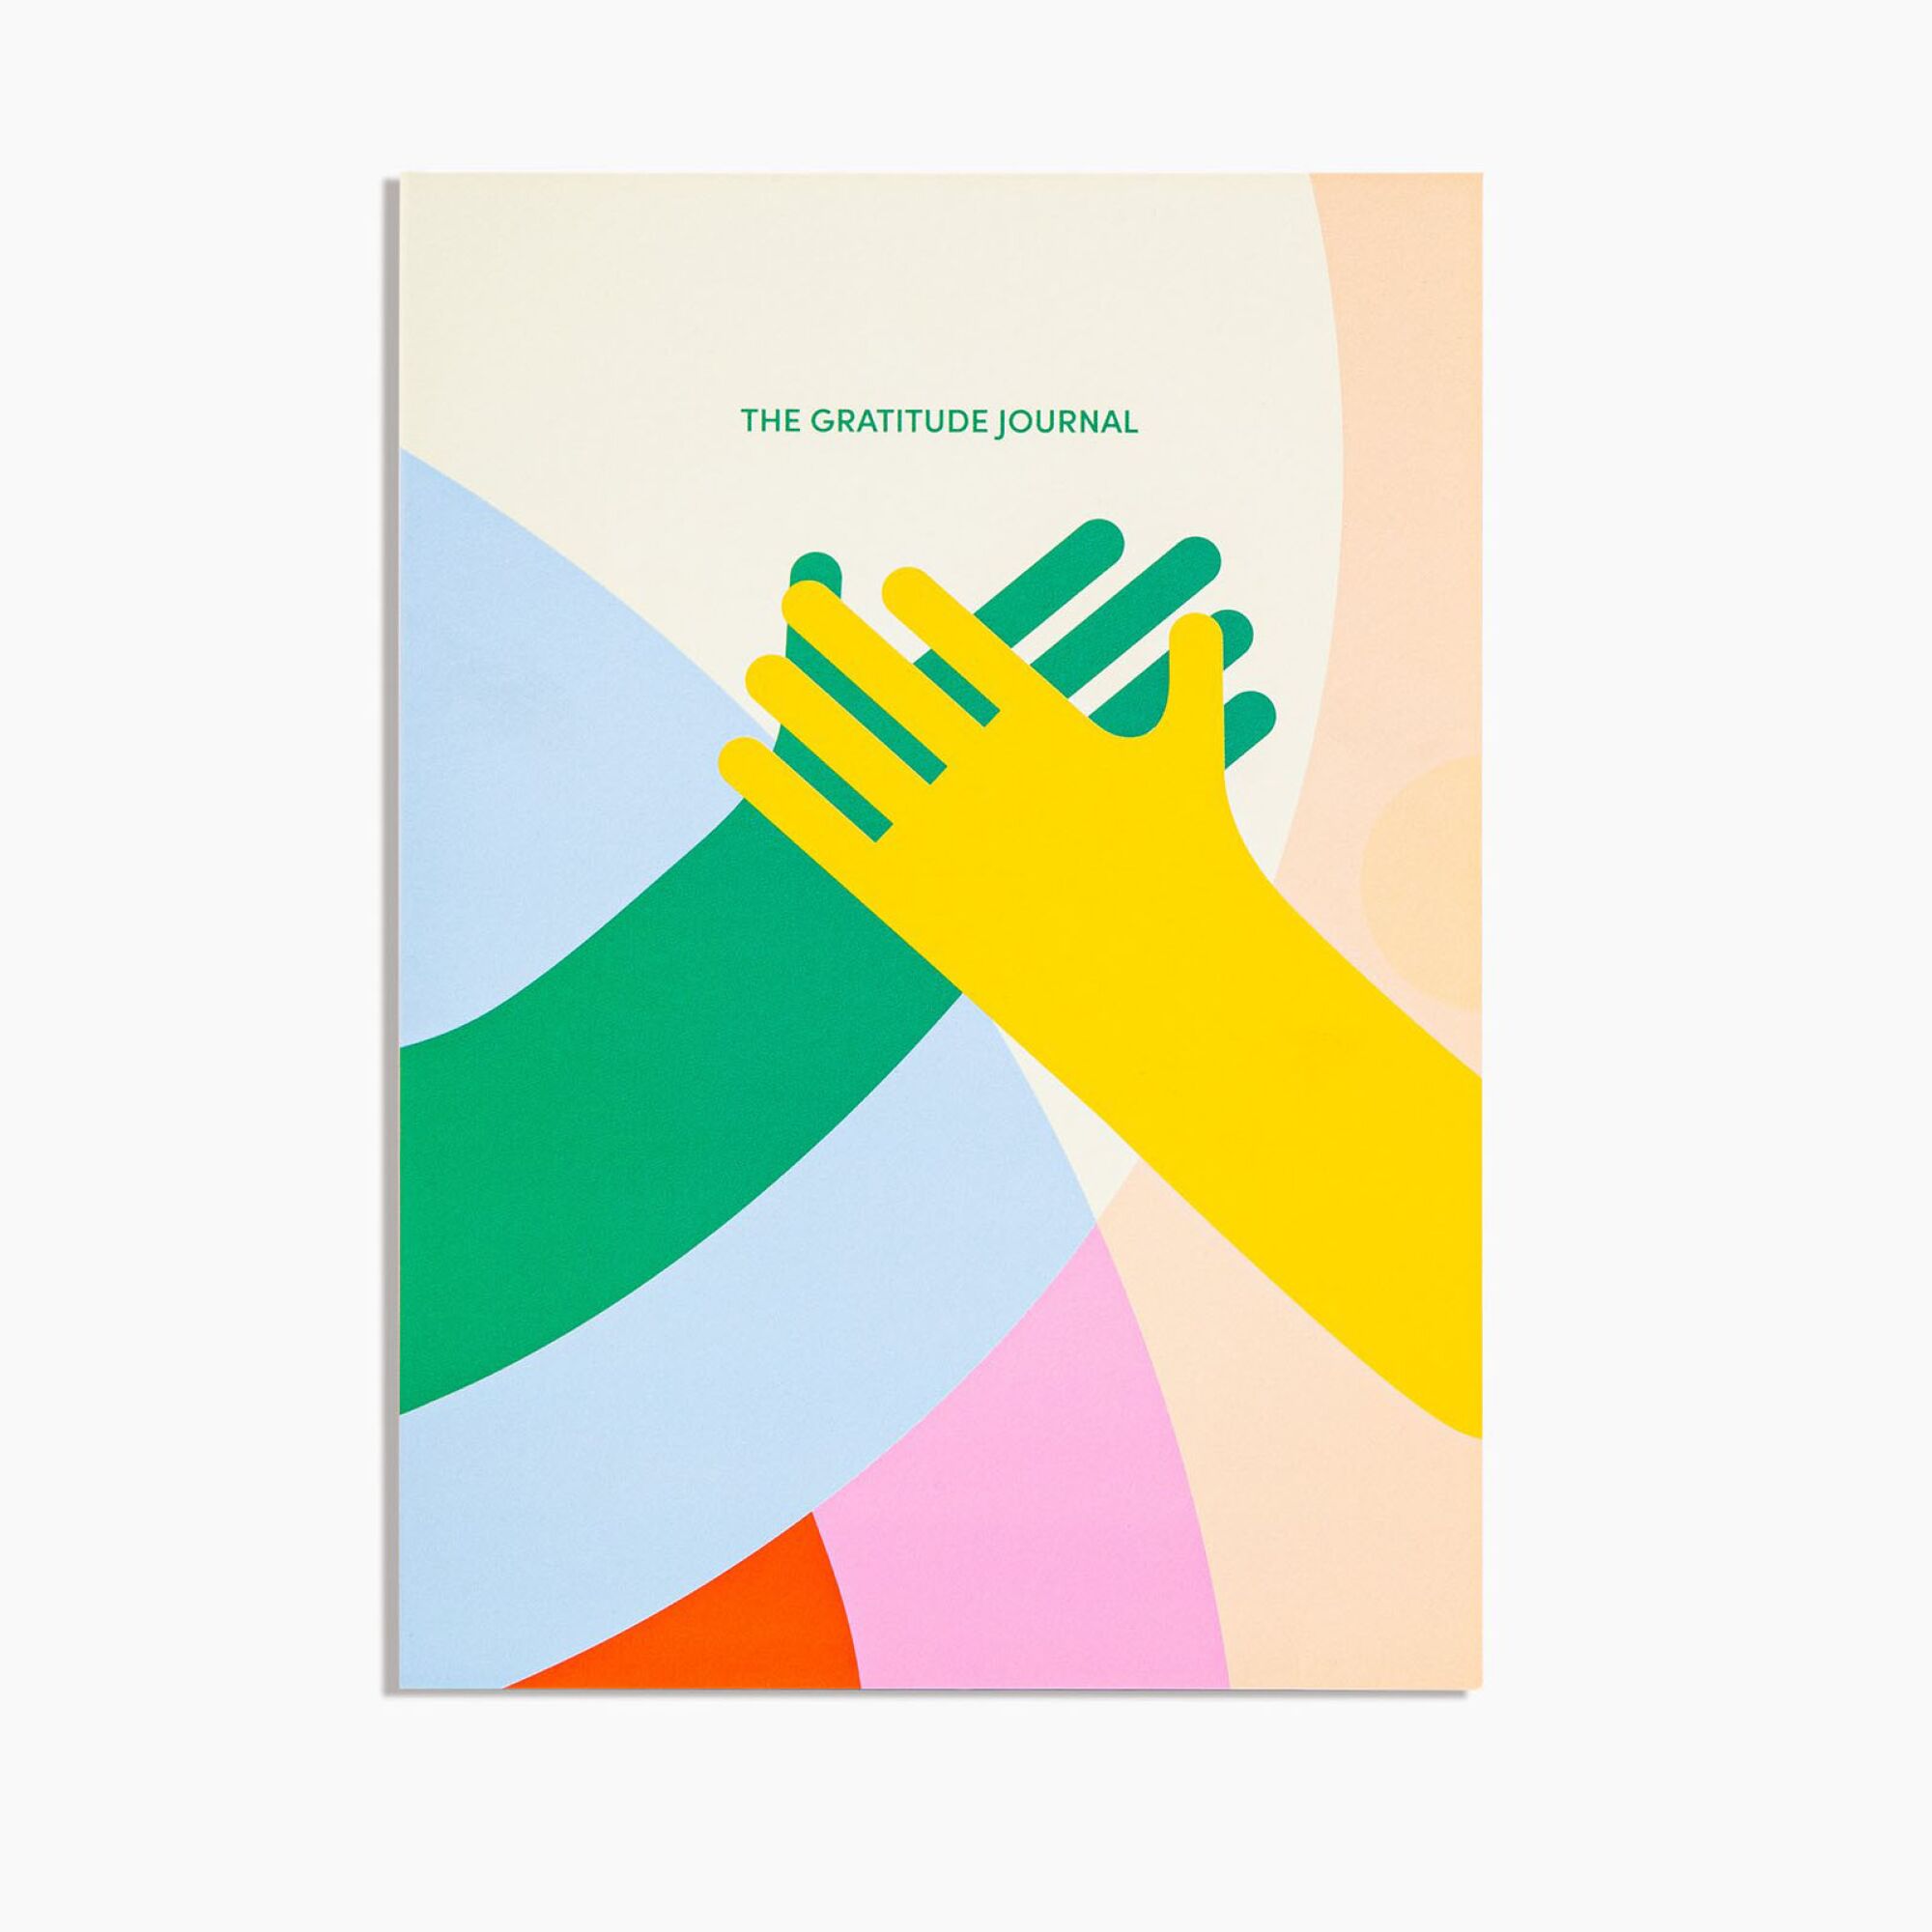 Colorful cover of the Gratitude Journal